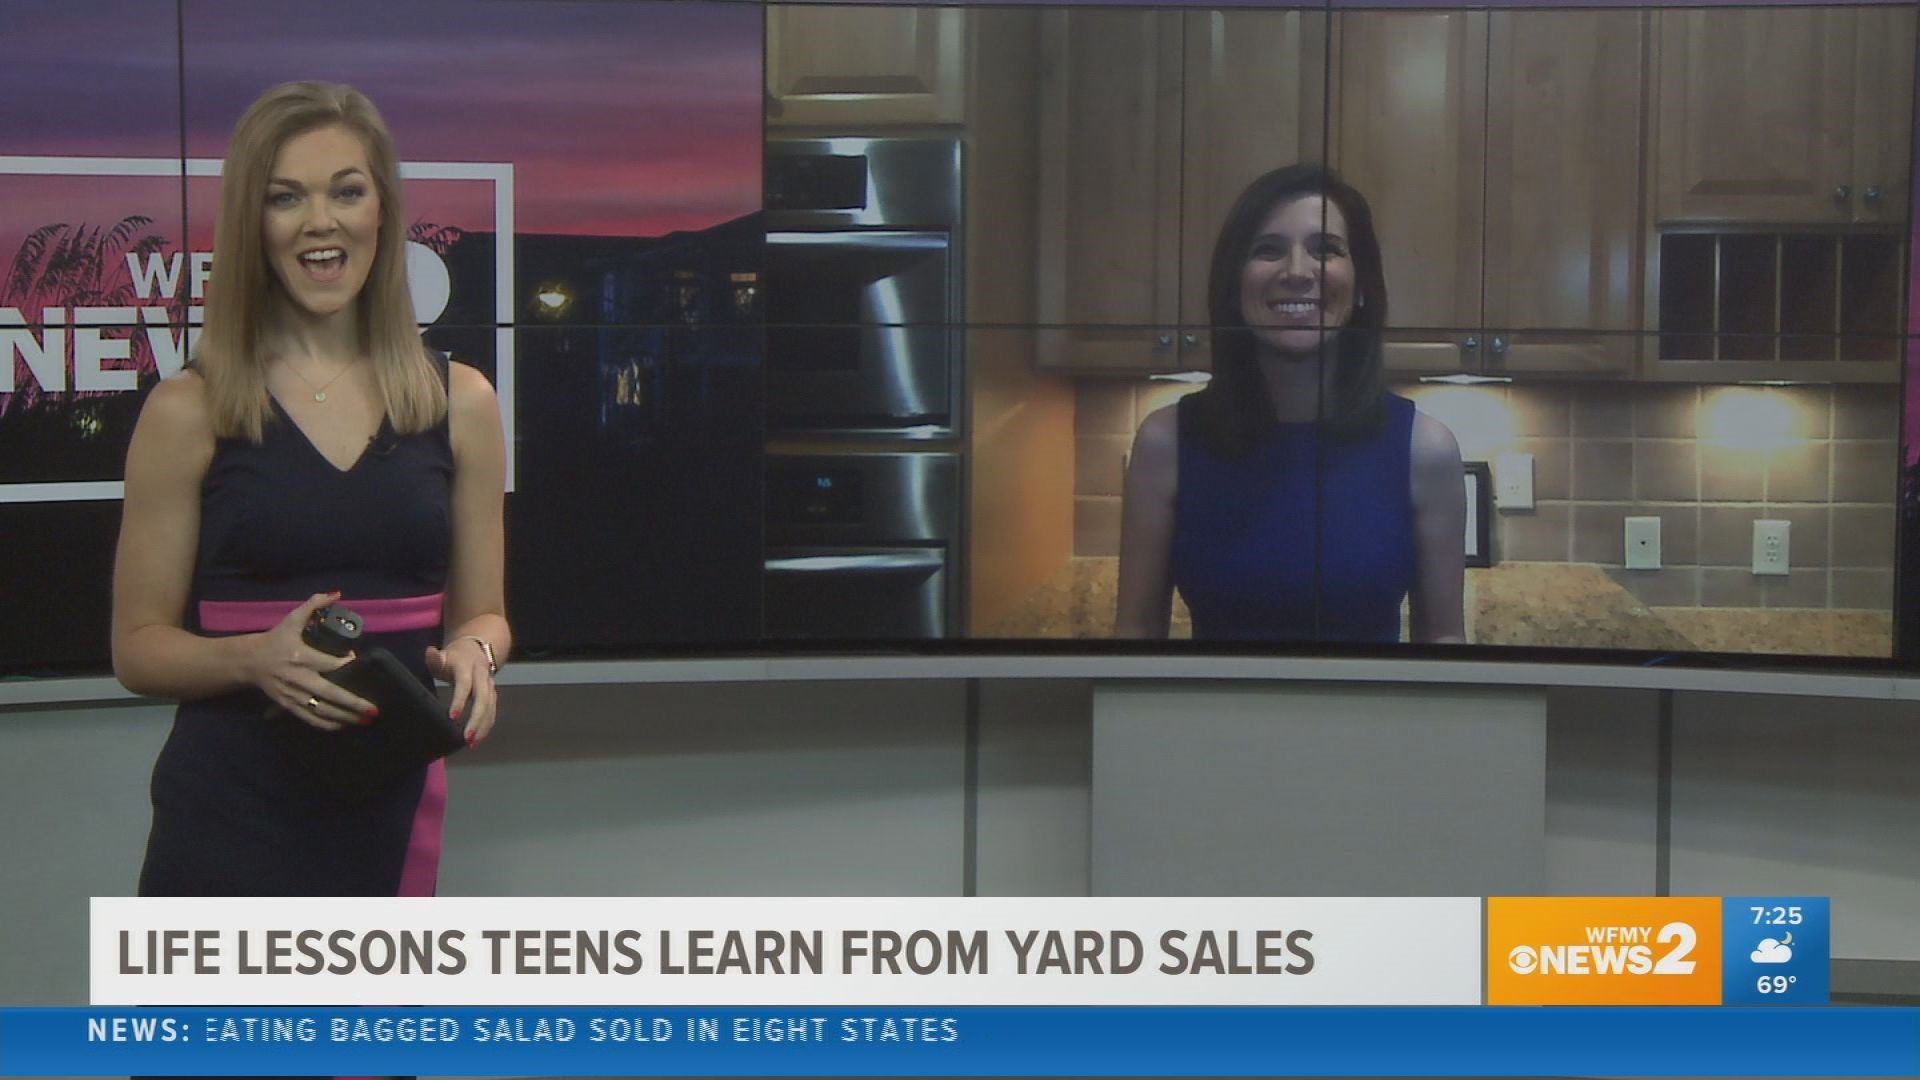 Planning, organizing and customer service are three skills teens learn from running a yard sale. These necessary skills are important for success in business.